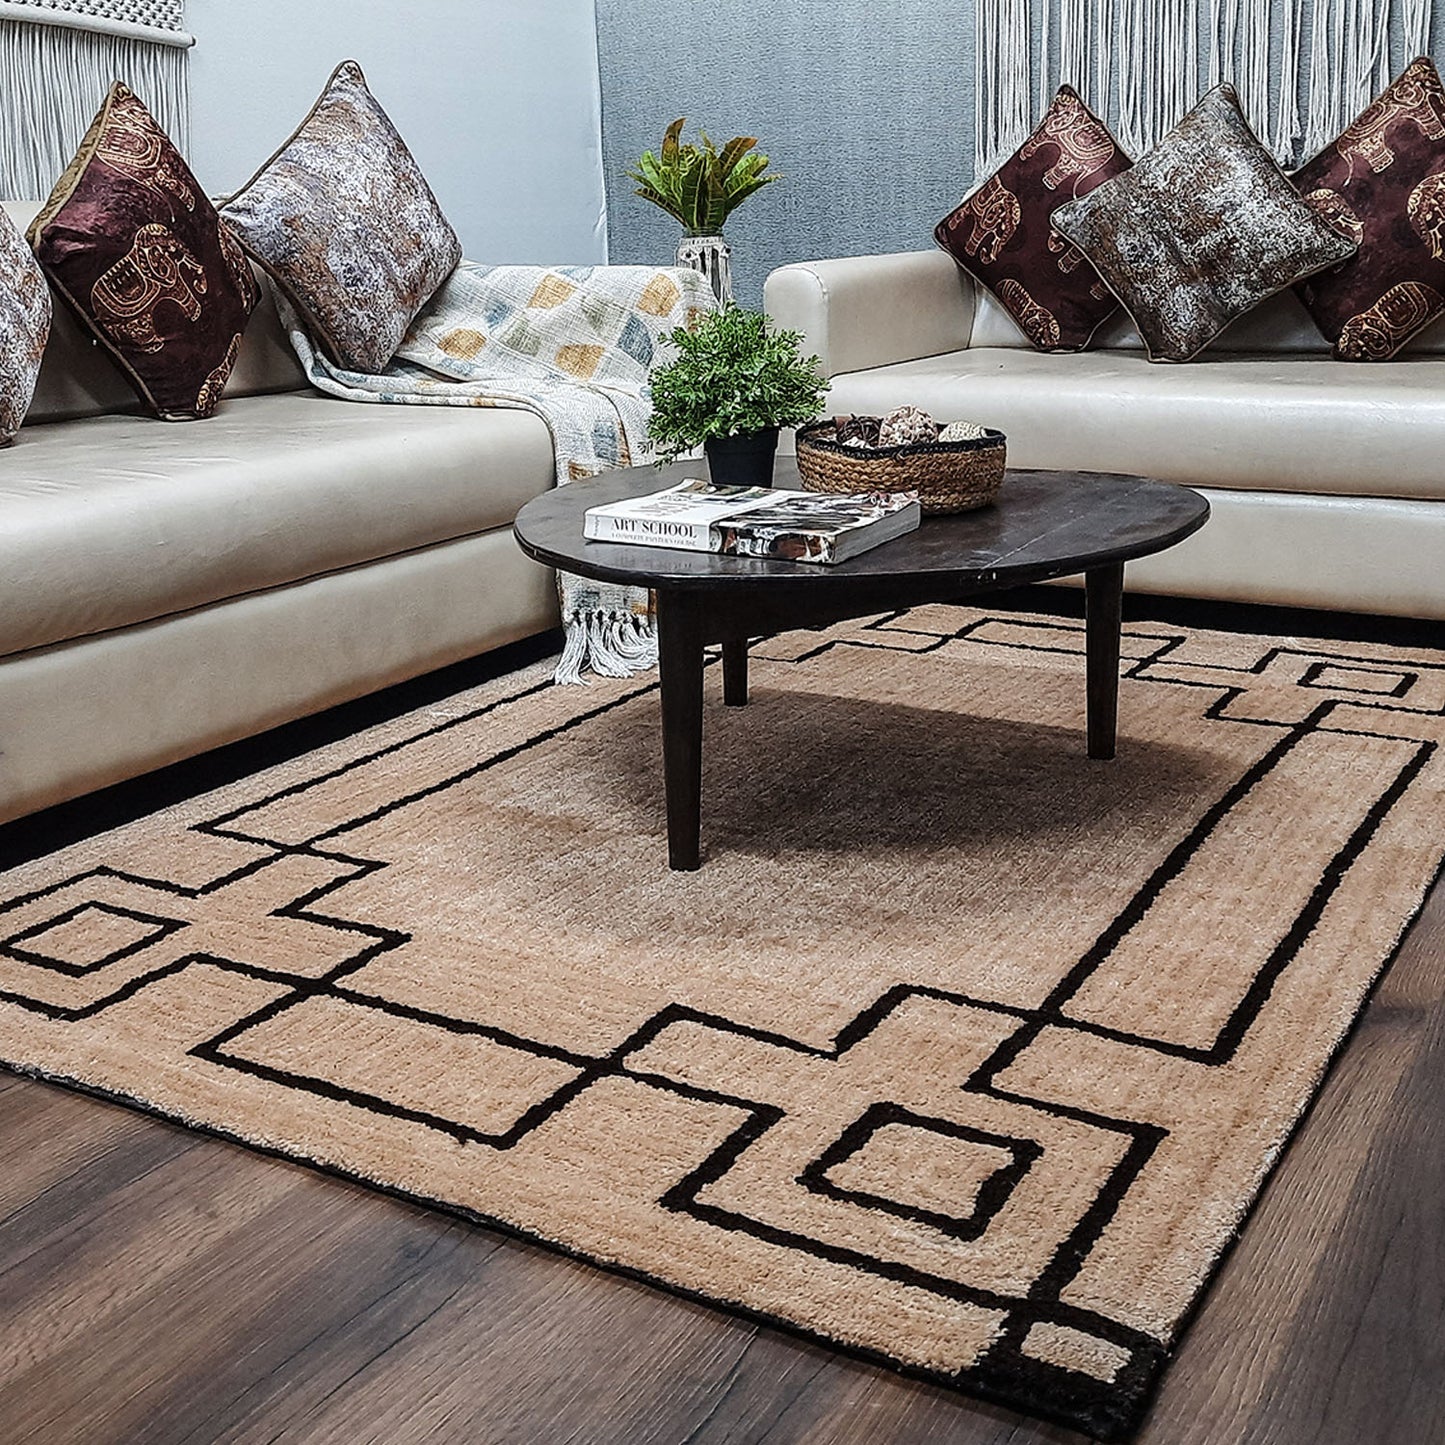 Avioni Luxury Collection- Plush Luxury Beige and CoffeeTone Carpet with 3d Traditional Design -Different Sizes Shaggy Fluffy Rugs and Carpet for Living Room